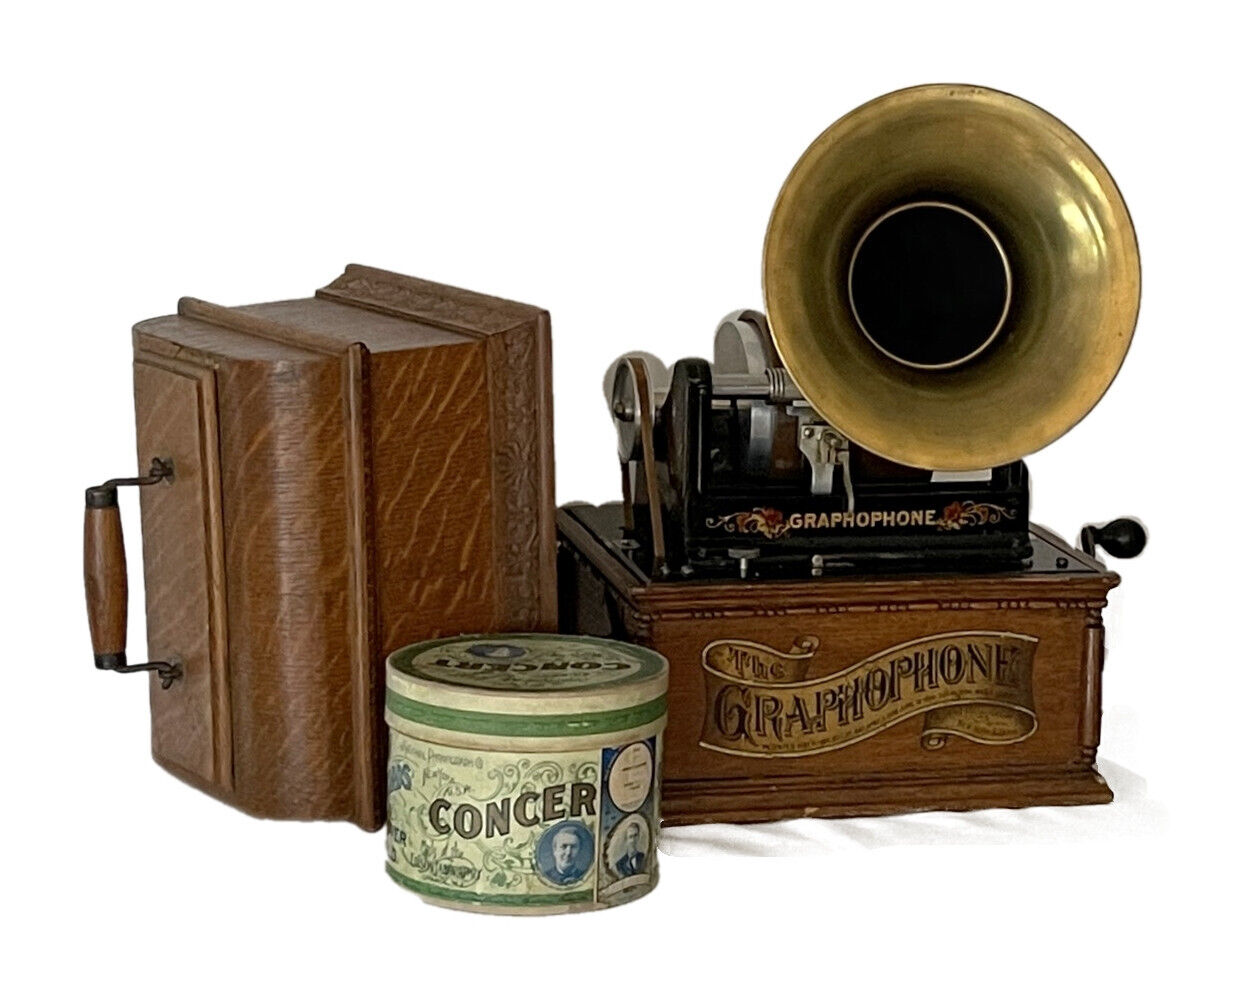 COLUMBIA AG  CYLINDER PHONOGRAPH w/CONCERT CYLINDER